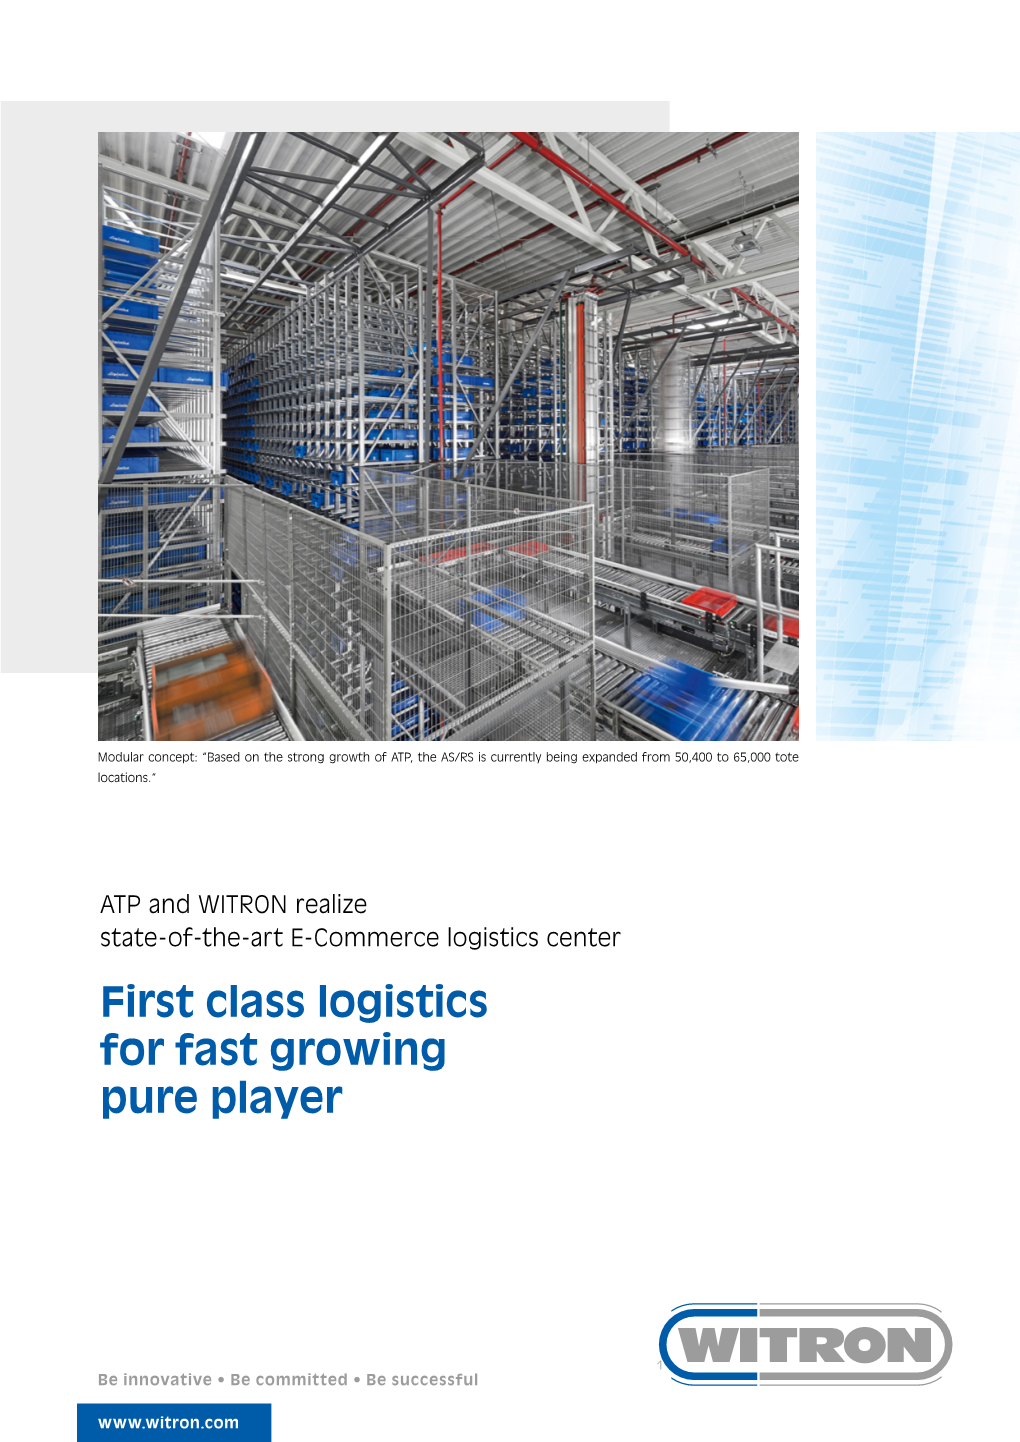 First Class Logistics for Fast Growing Pure Player